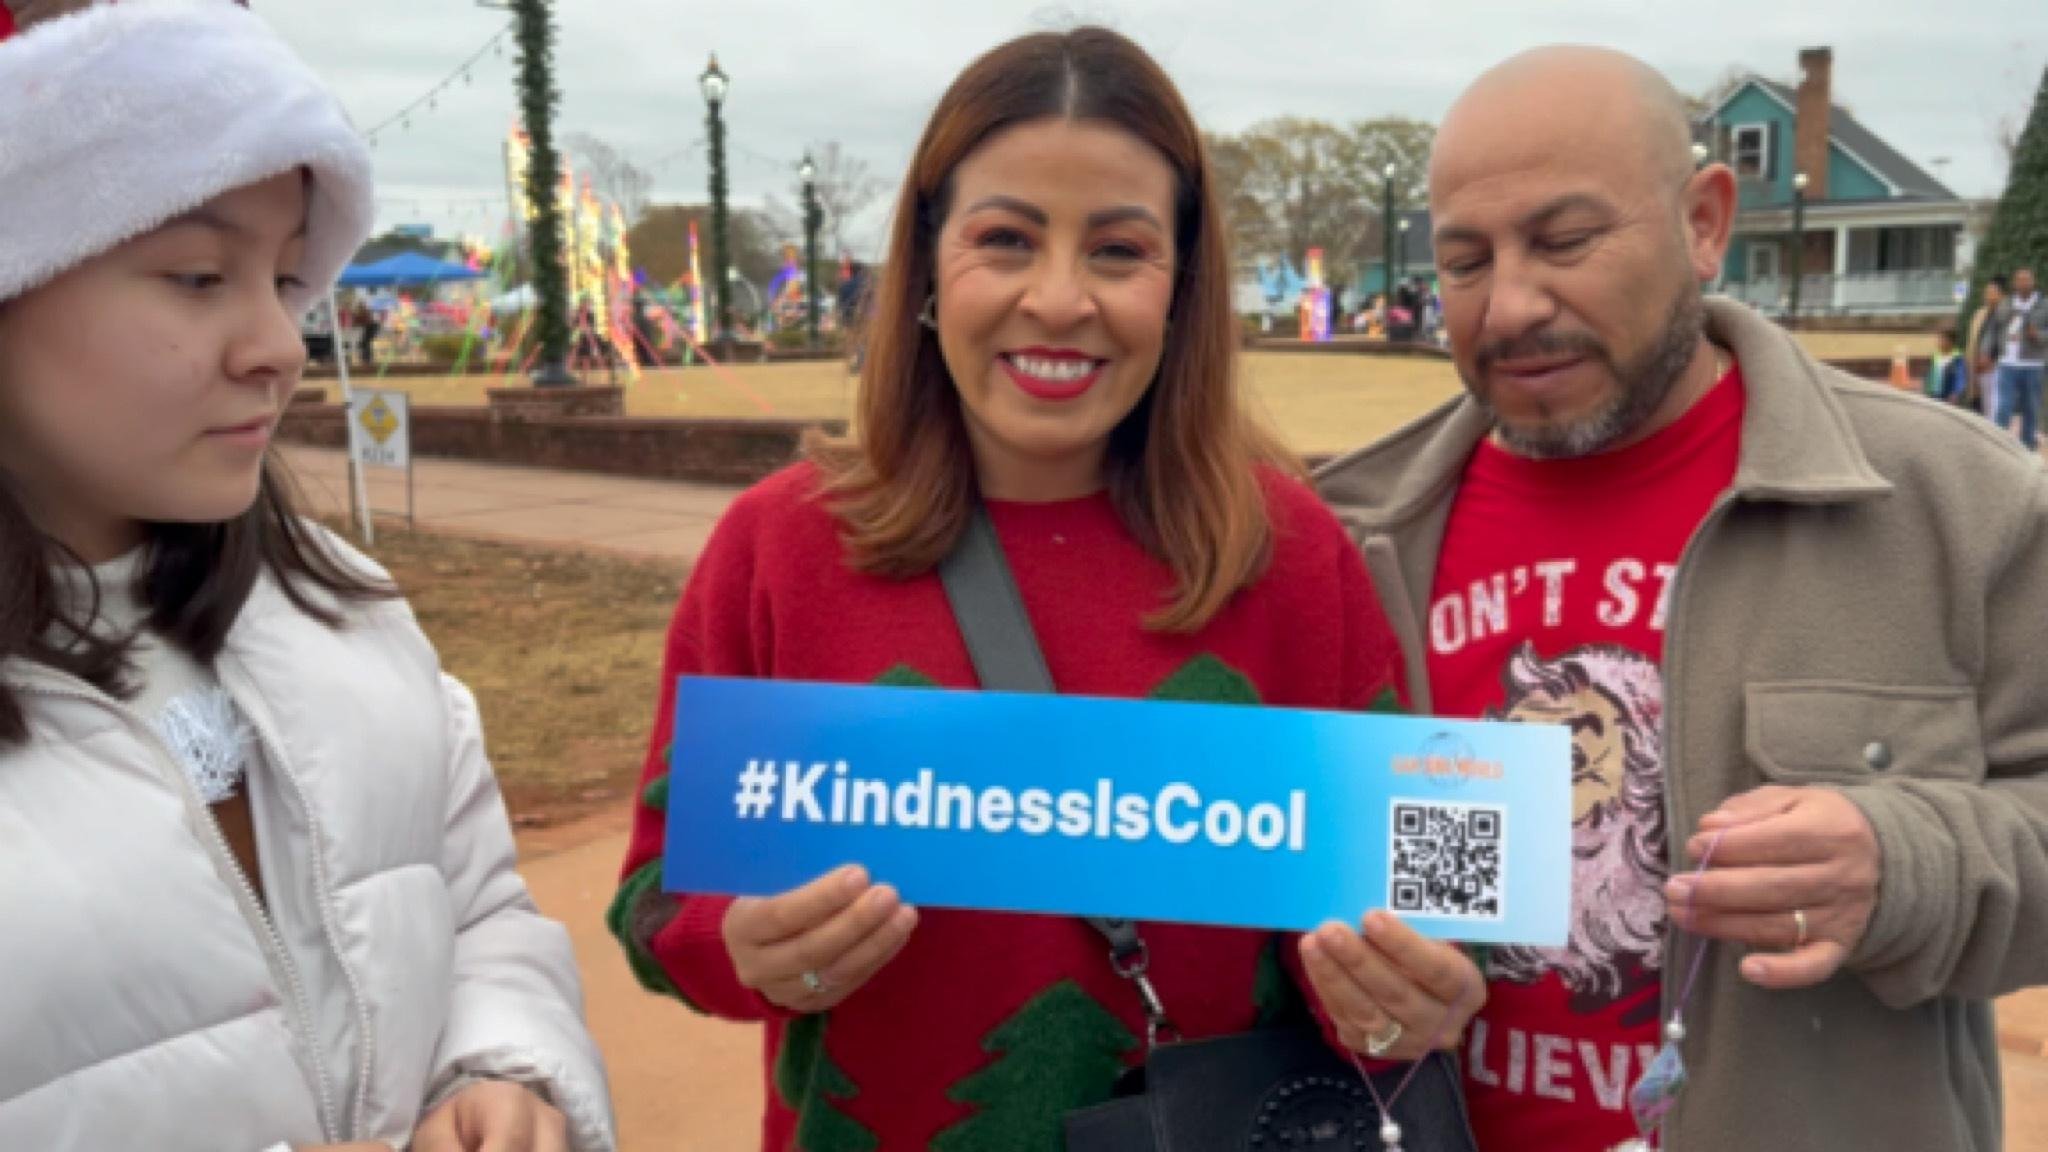 #kindnessiscool